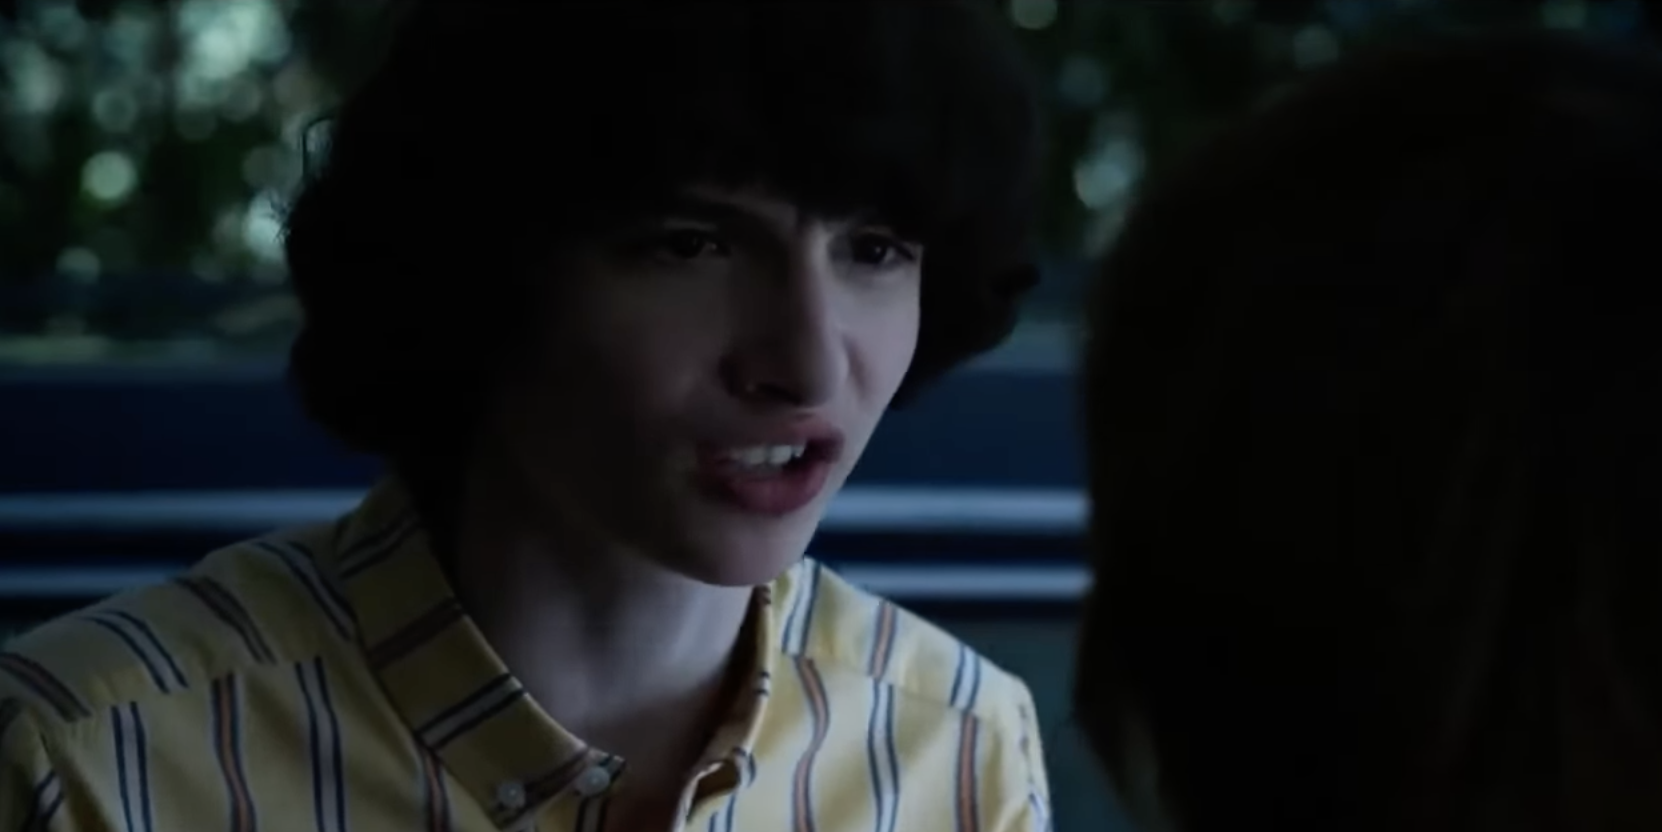 Stranger Things' star on Will's sexuality: 'It's up to the